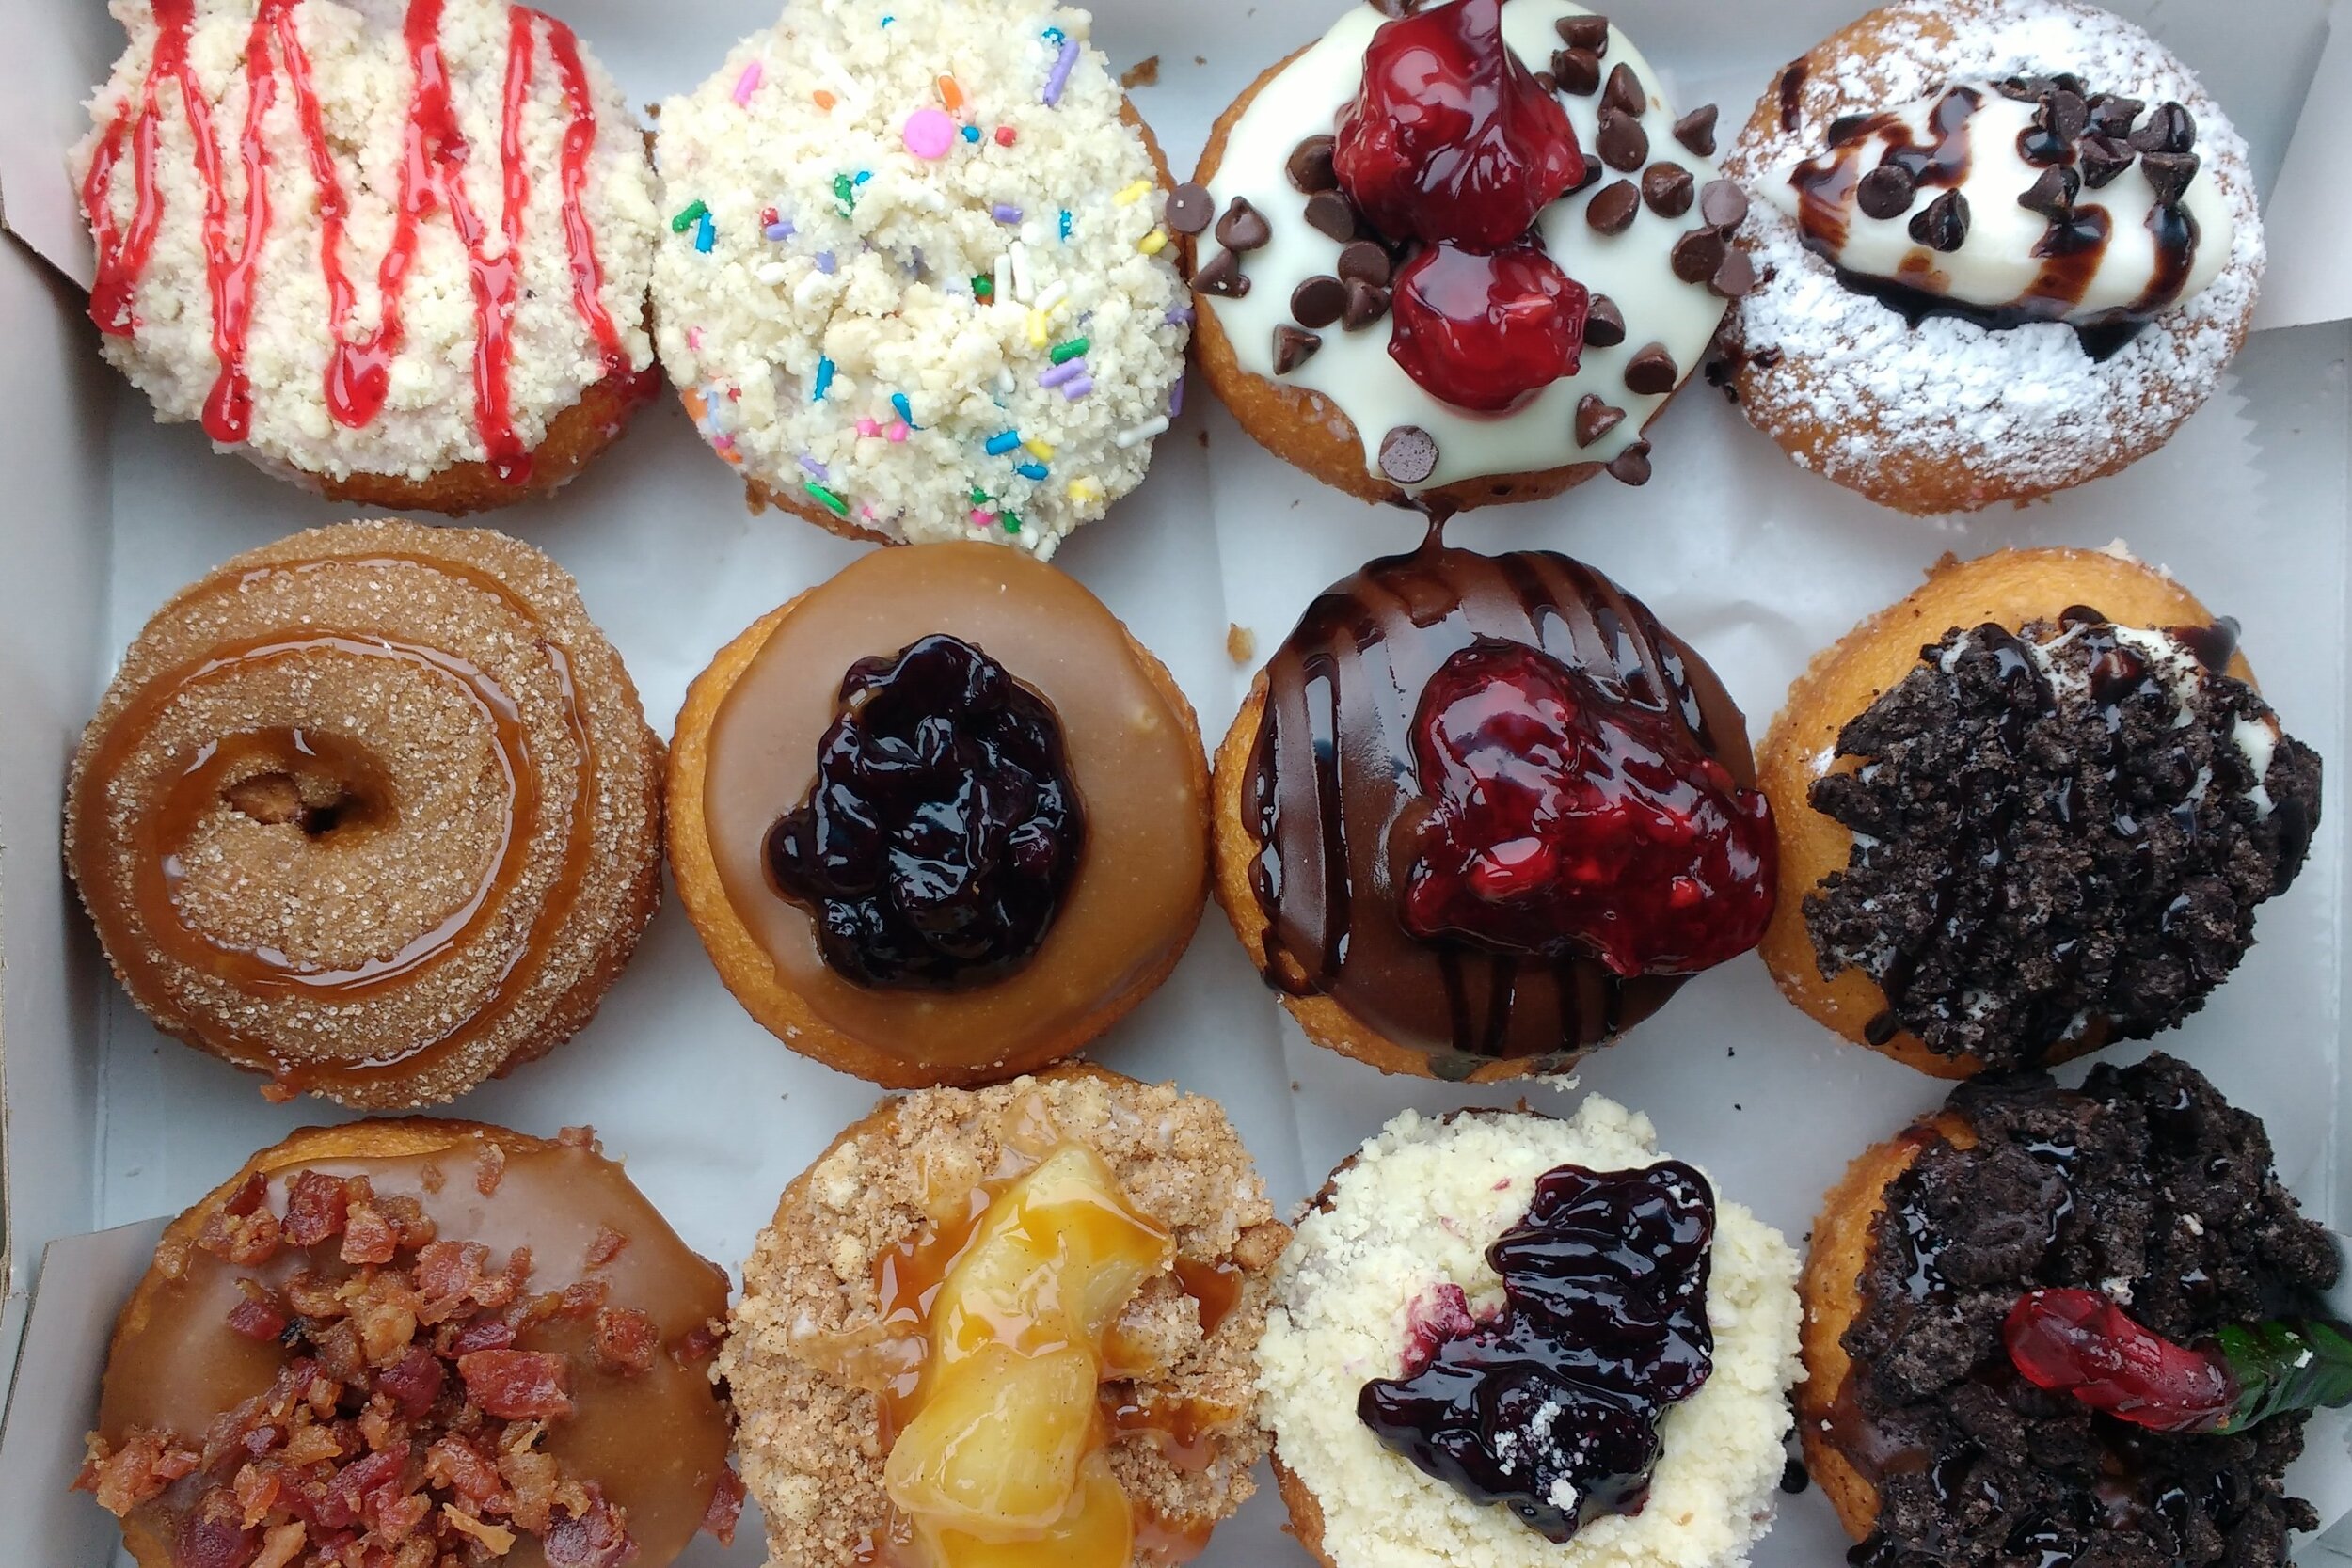 These particular doughnuts came from Peace, Love and Little Donuts, in Buffalo, NY.